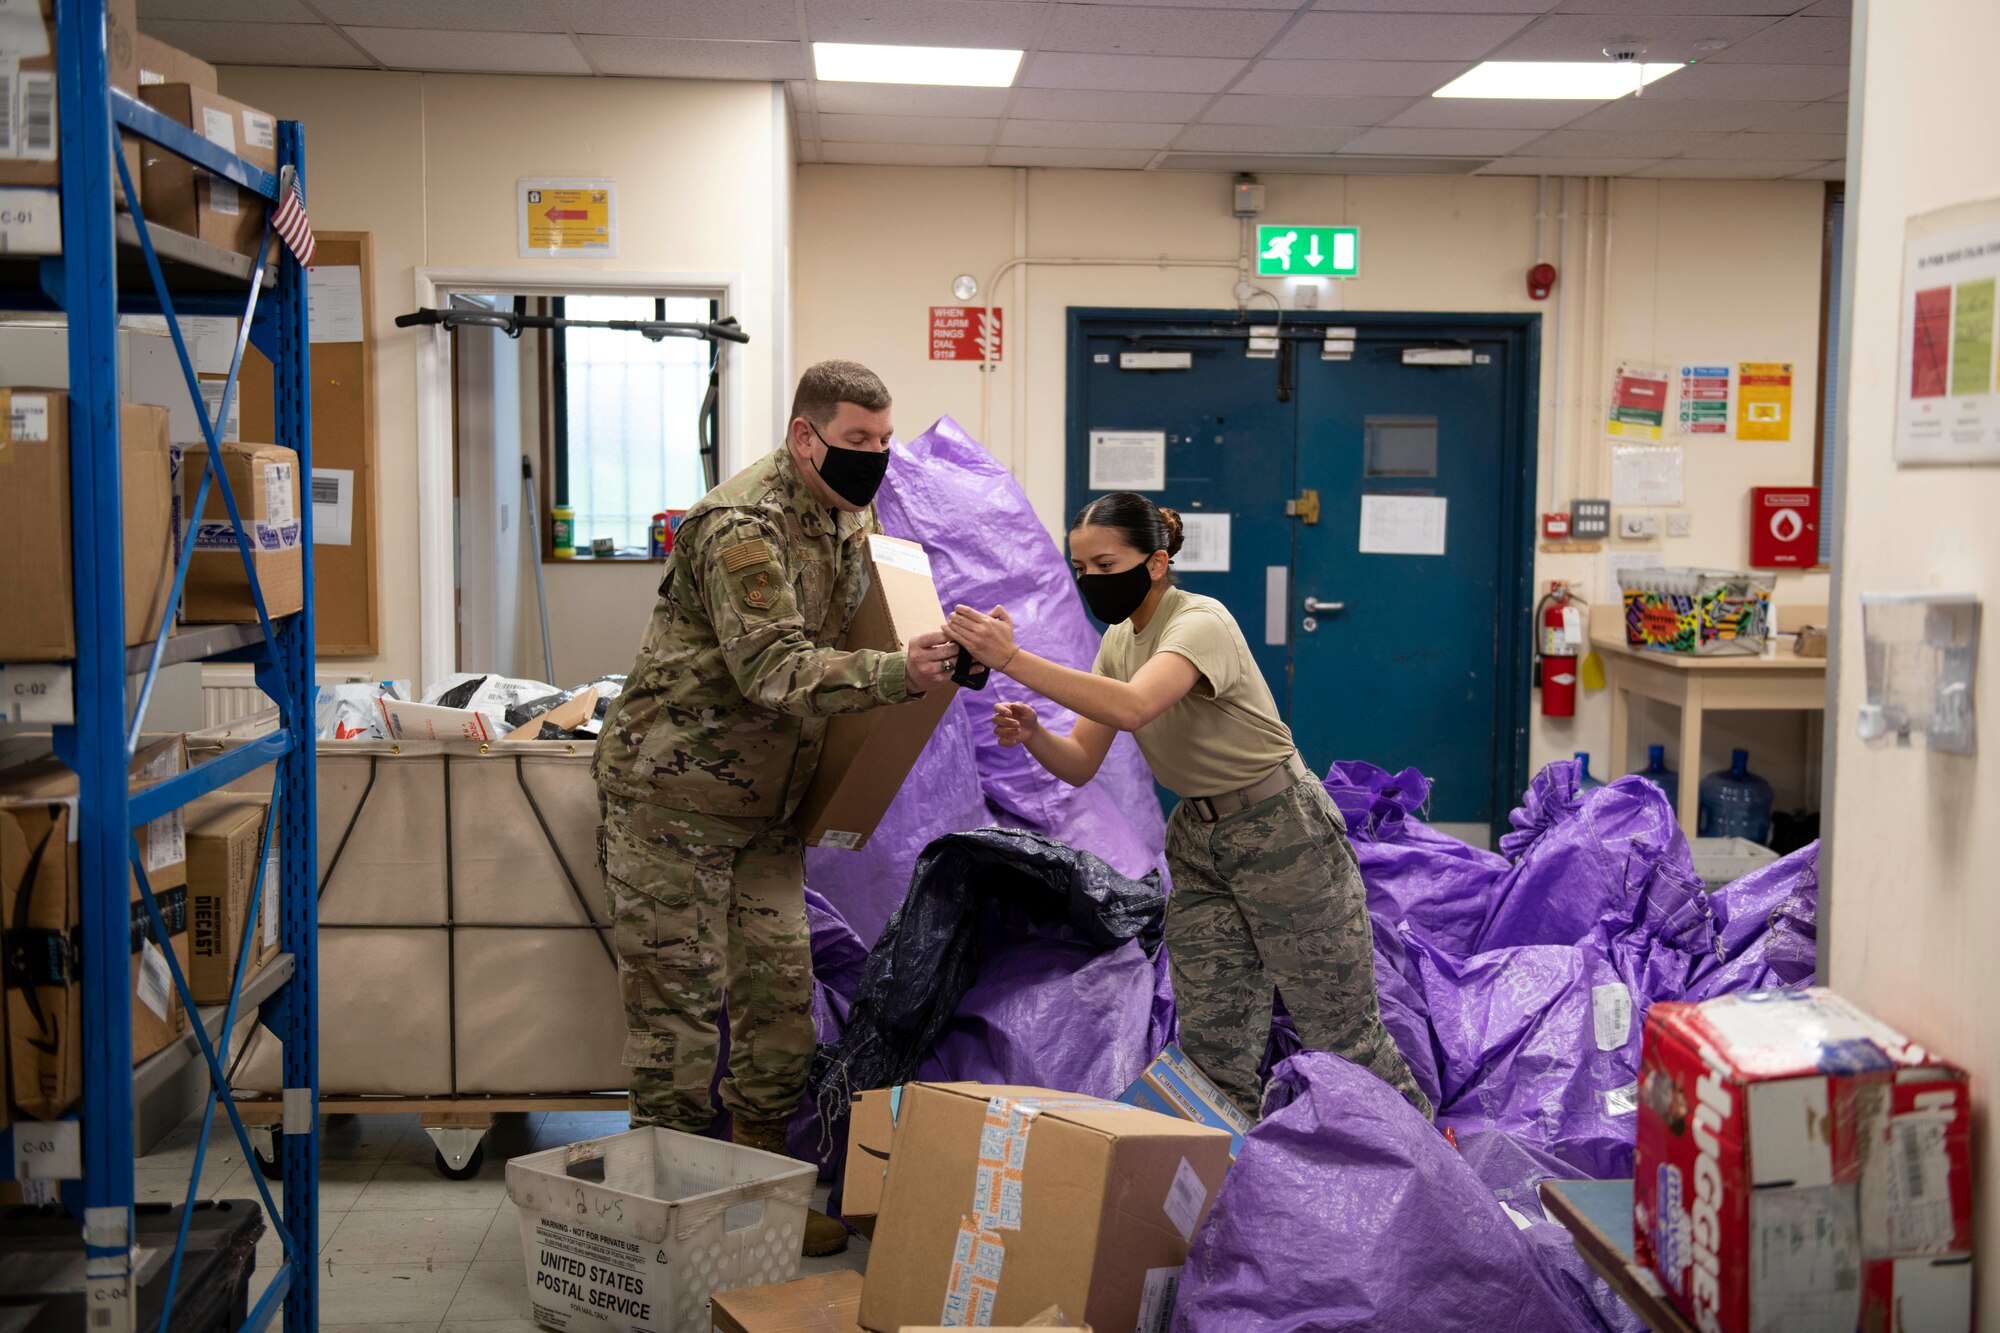 U.S. Air Force Airman 1st Class Melanie Macato, right, 423rd Force Support Squadron postal clerk, shows Col. Kurt Wendt, left, 501st Combat Support Wing commander, how to remove collected packages from the system, at the Royal Air Force Molesworth Post Office, England, Dec. 9, 2020. Airmen and civilians have volunteered at the post office to help with the influx of packages during the holiday season. (U.S. Air Force photo by Senior Airman Jennifer Zima)